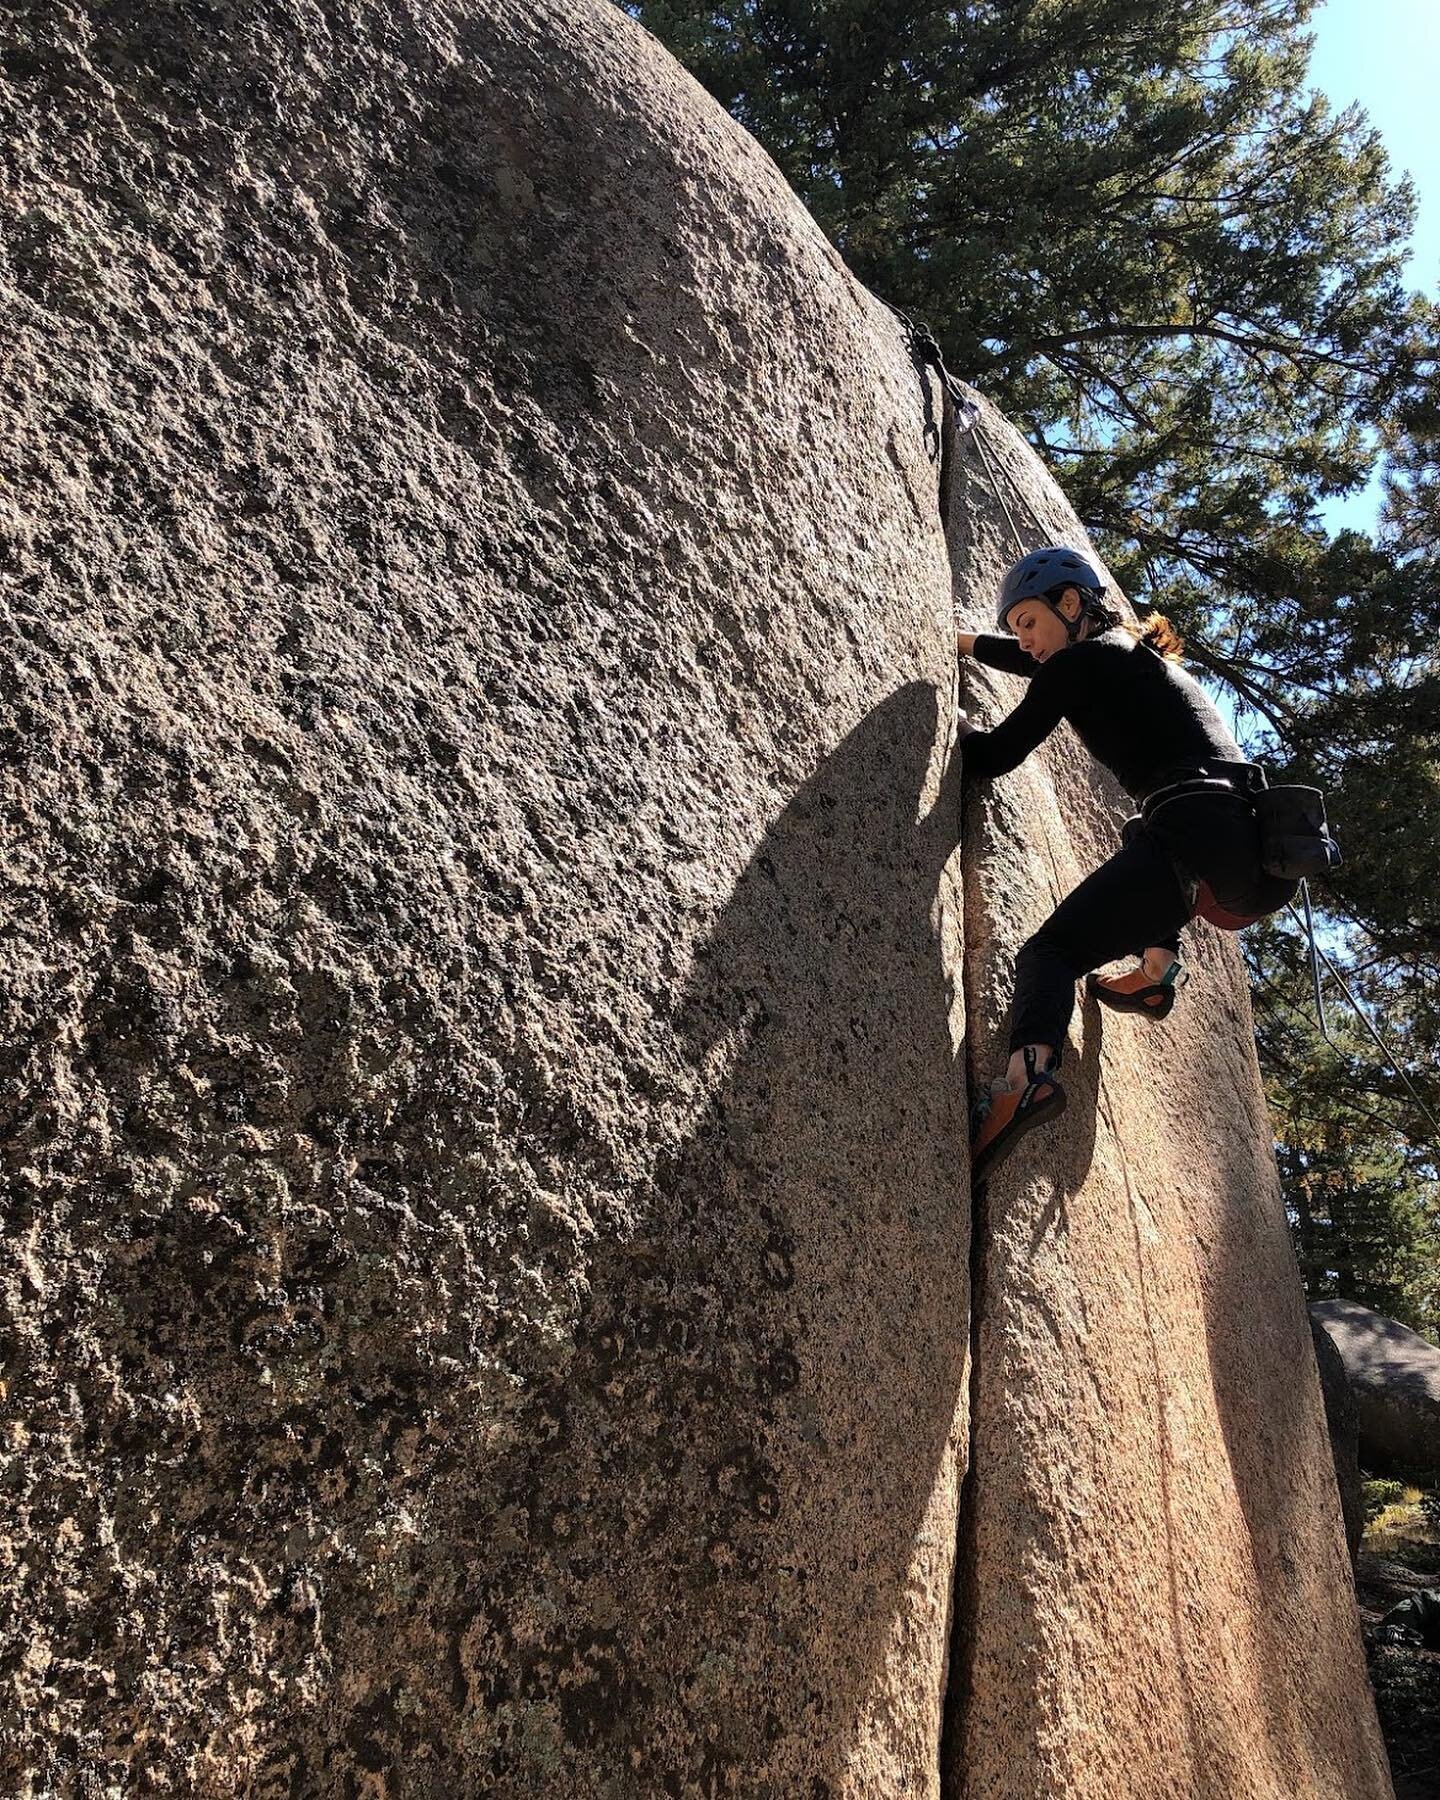 They say crack is addictive, and now I can see why 😝 but seriously, amazed at how deep the complexities of this sport go and continually astounded by the fulfillment it brings to my life.

Grateful for my ever growing community of climbing friends, 